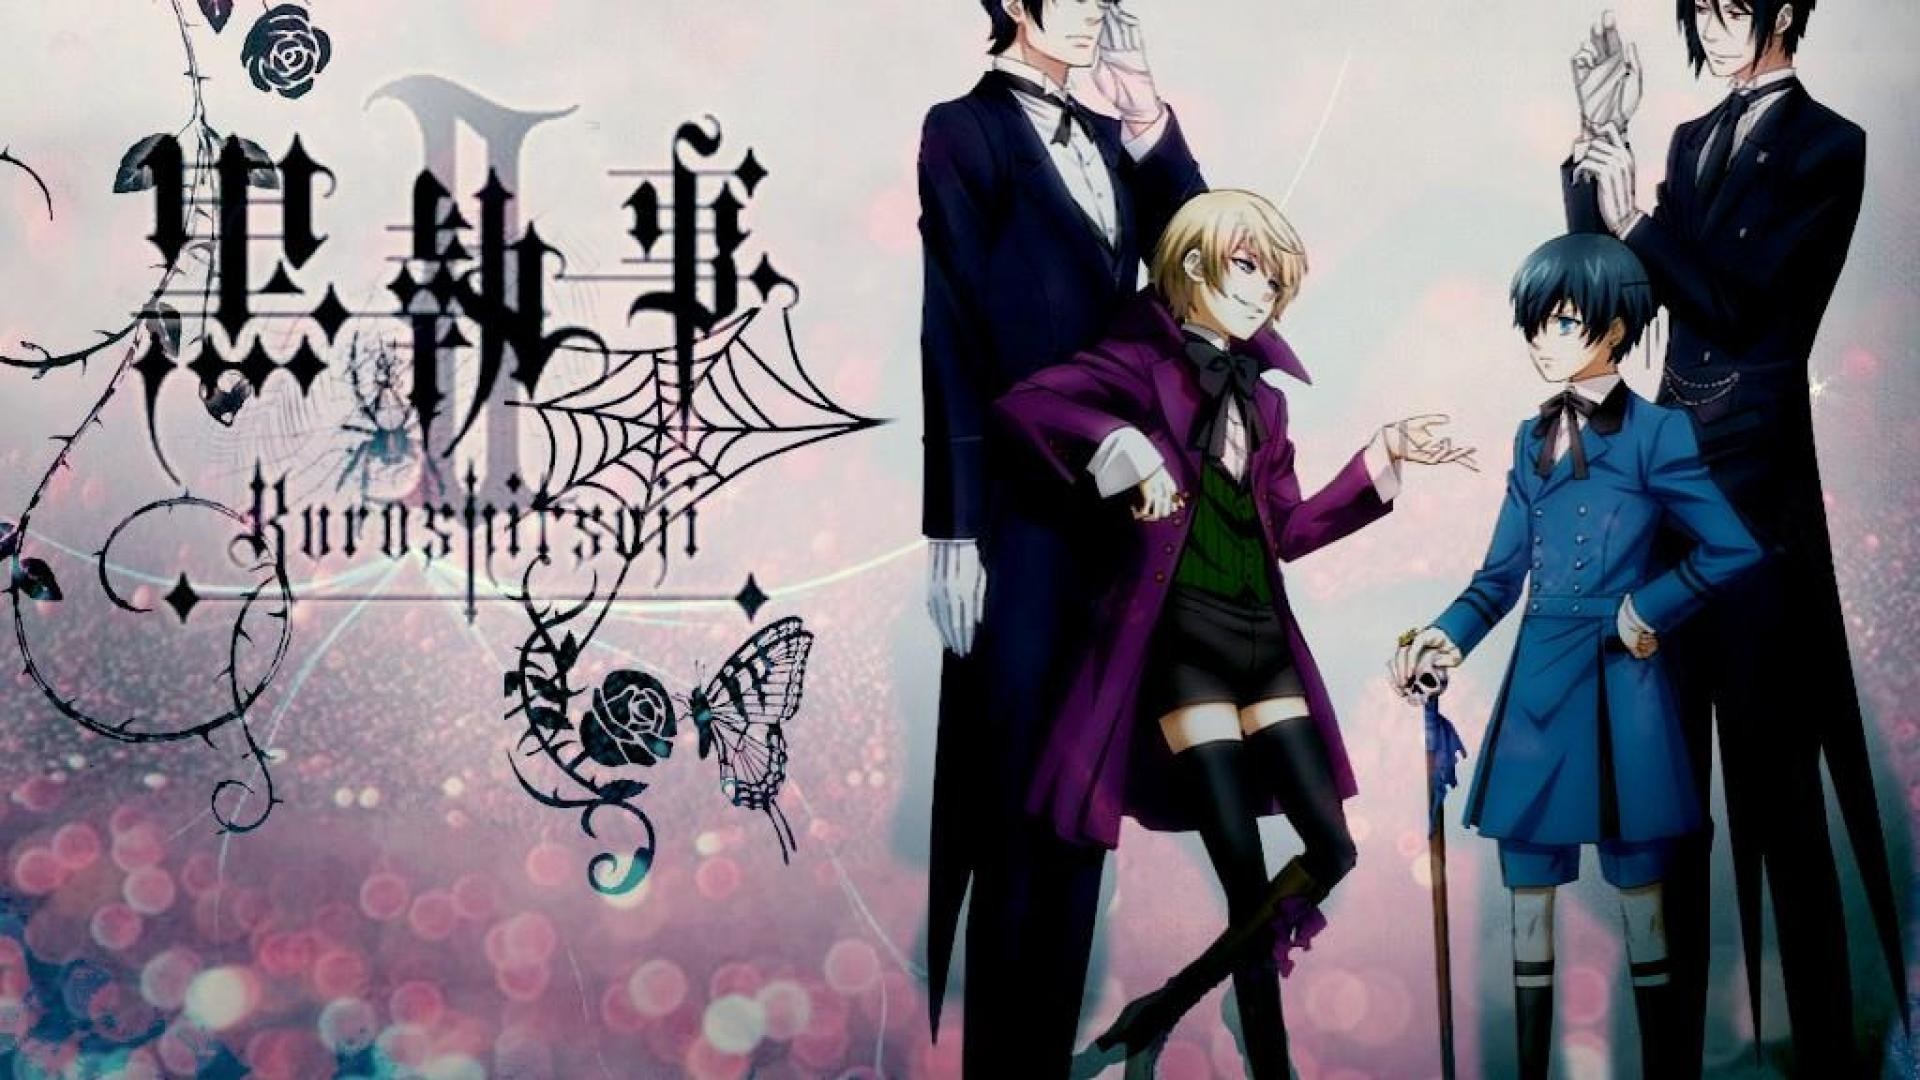 1920x1080 Search Results for “ciel and alois wallpaper” – Adorable Wallpapers